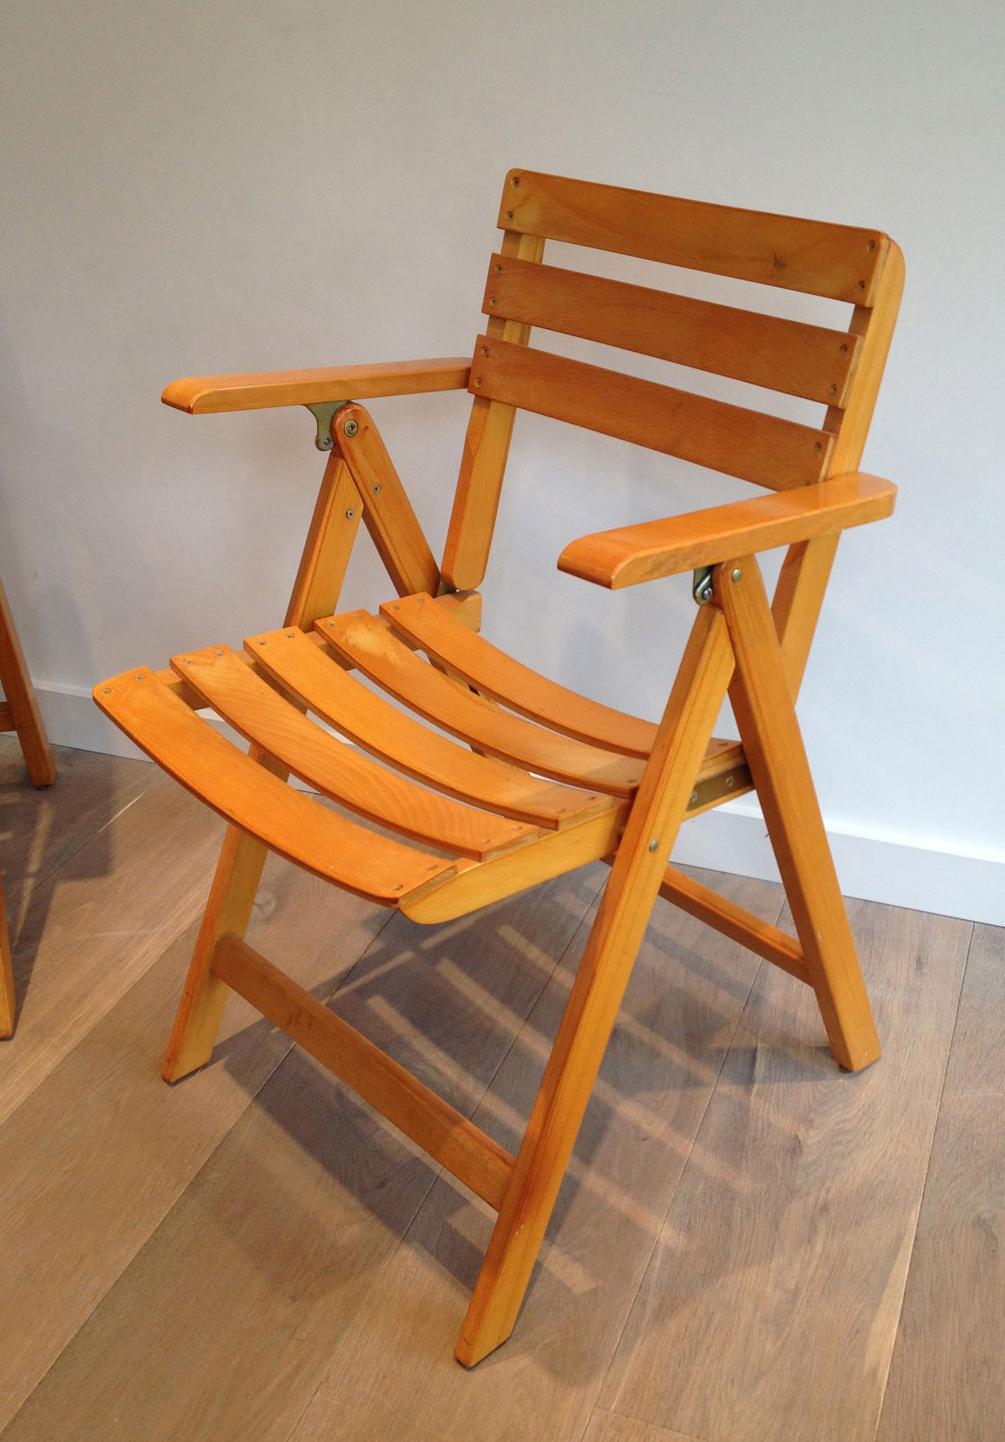 Mid-Century Modern Pair of Wooden Armchairs, French Work Signed Clairitex, Circa 1970 For Sale